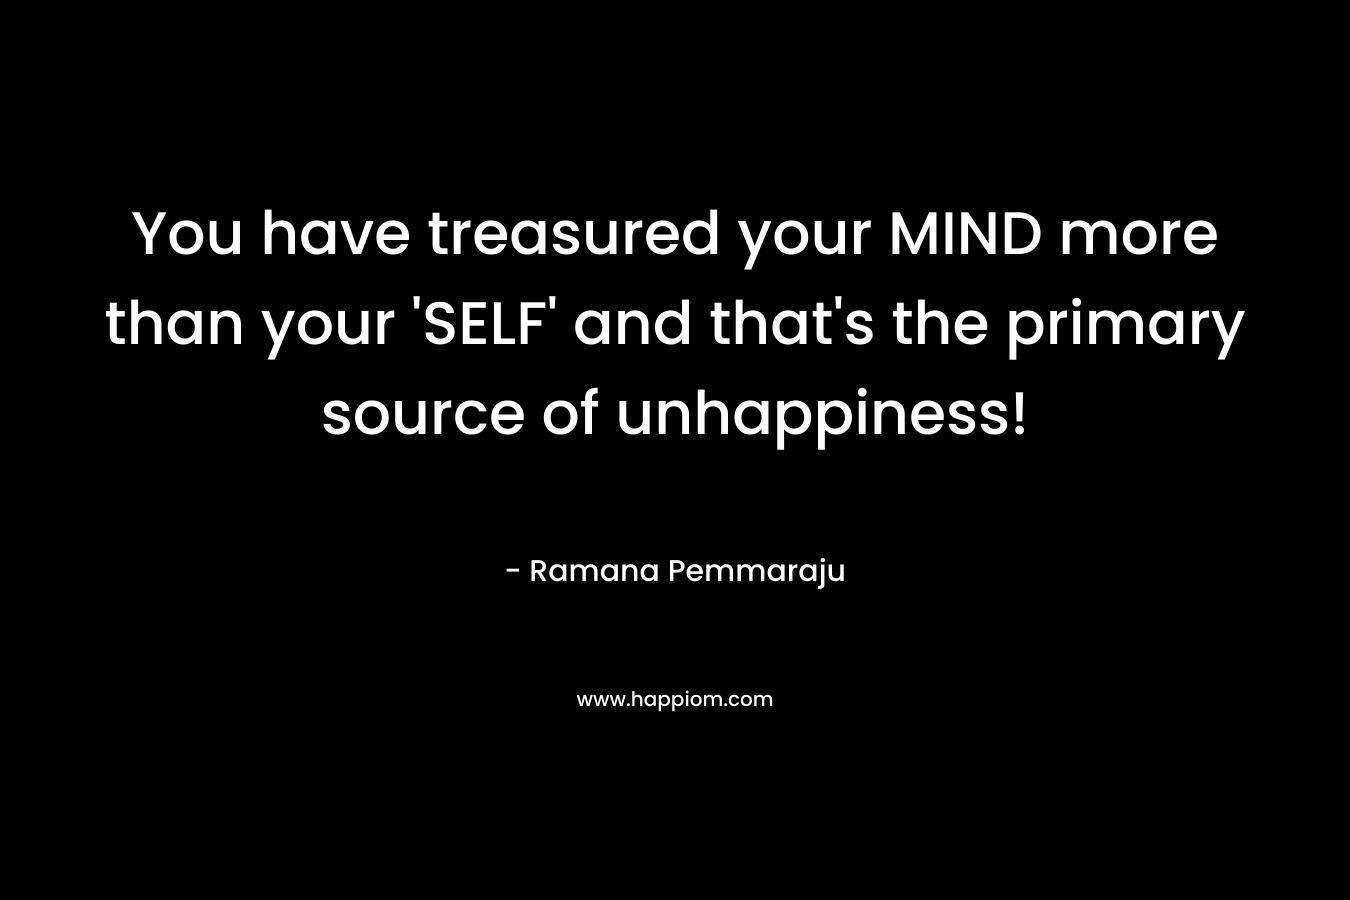 You have treasured your MIND more than your 'SELF' and that's the primary source of unhappiness!